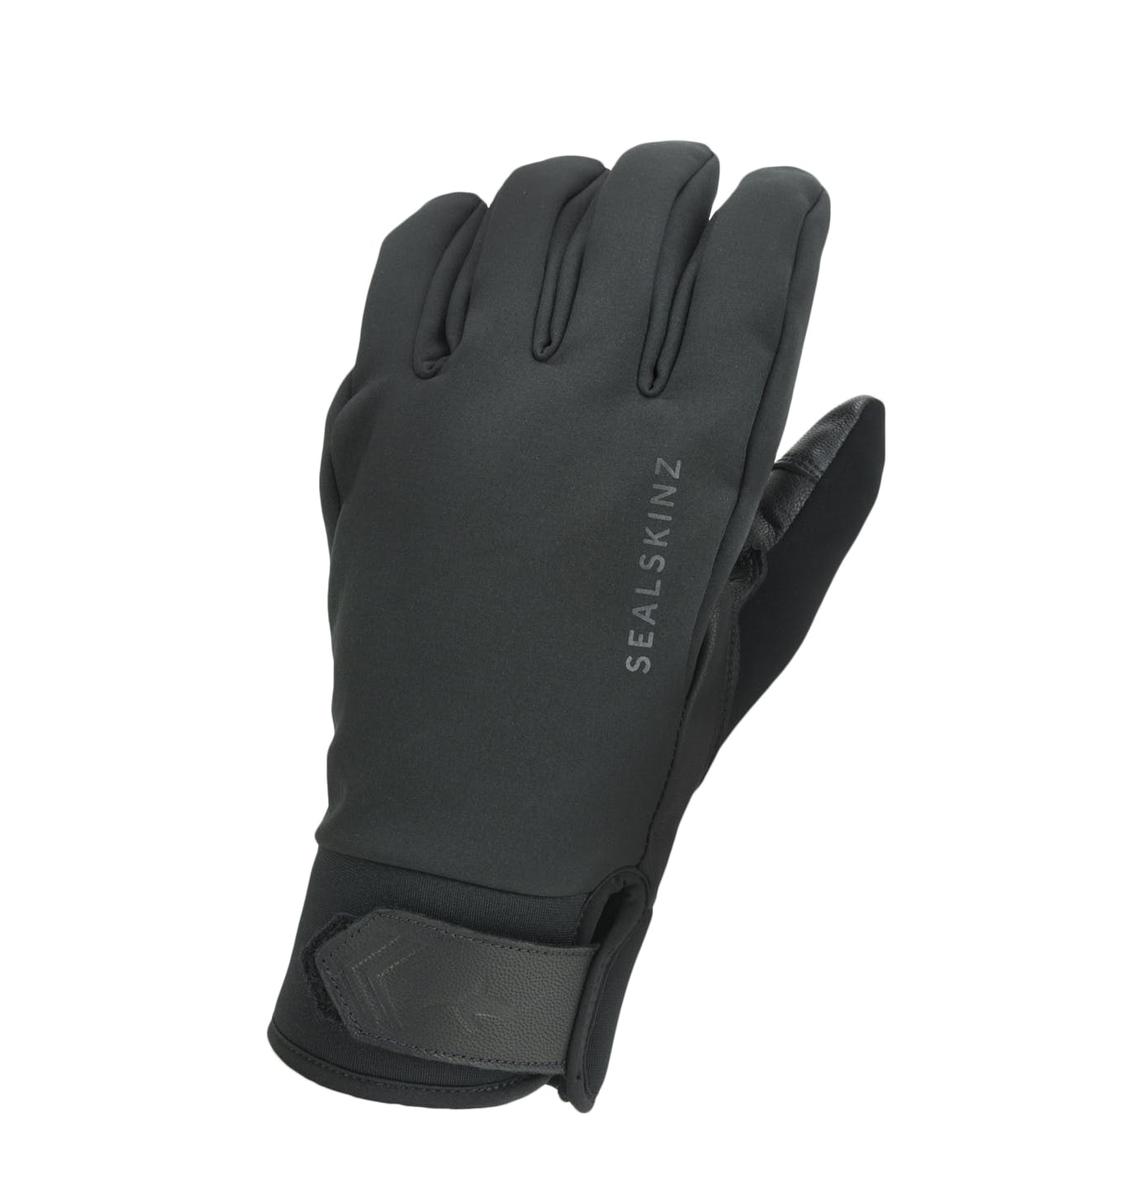 22683 Seal Skinz Waterproof All Weather Sporting Glove Gloves & Mitts 